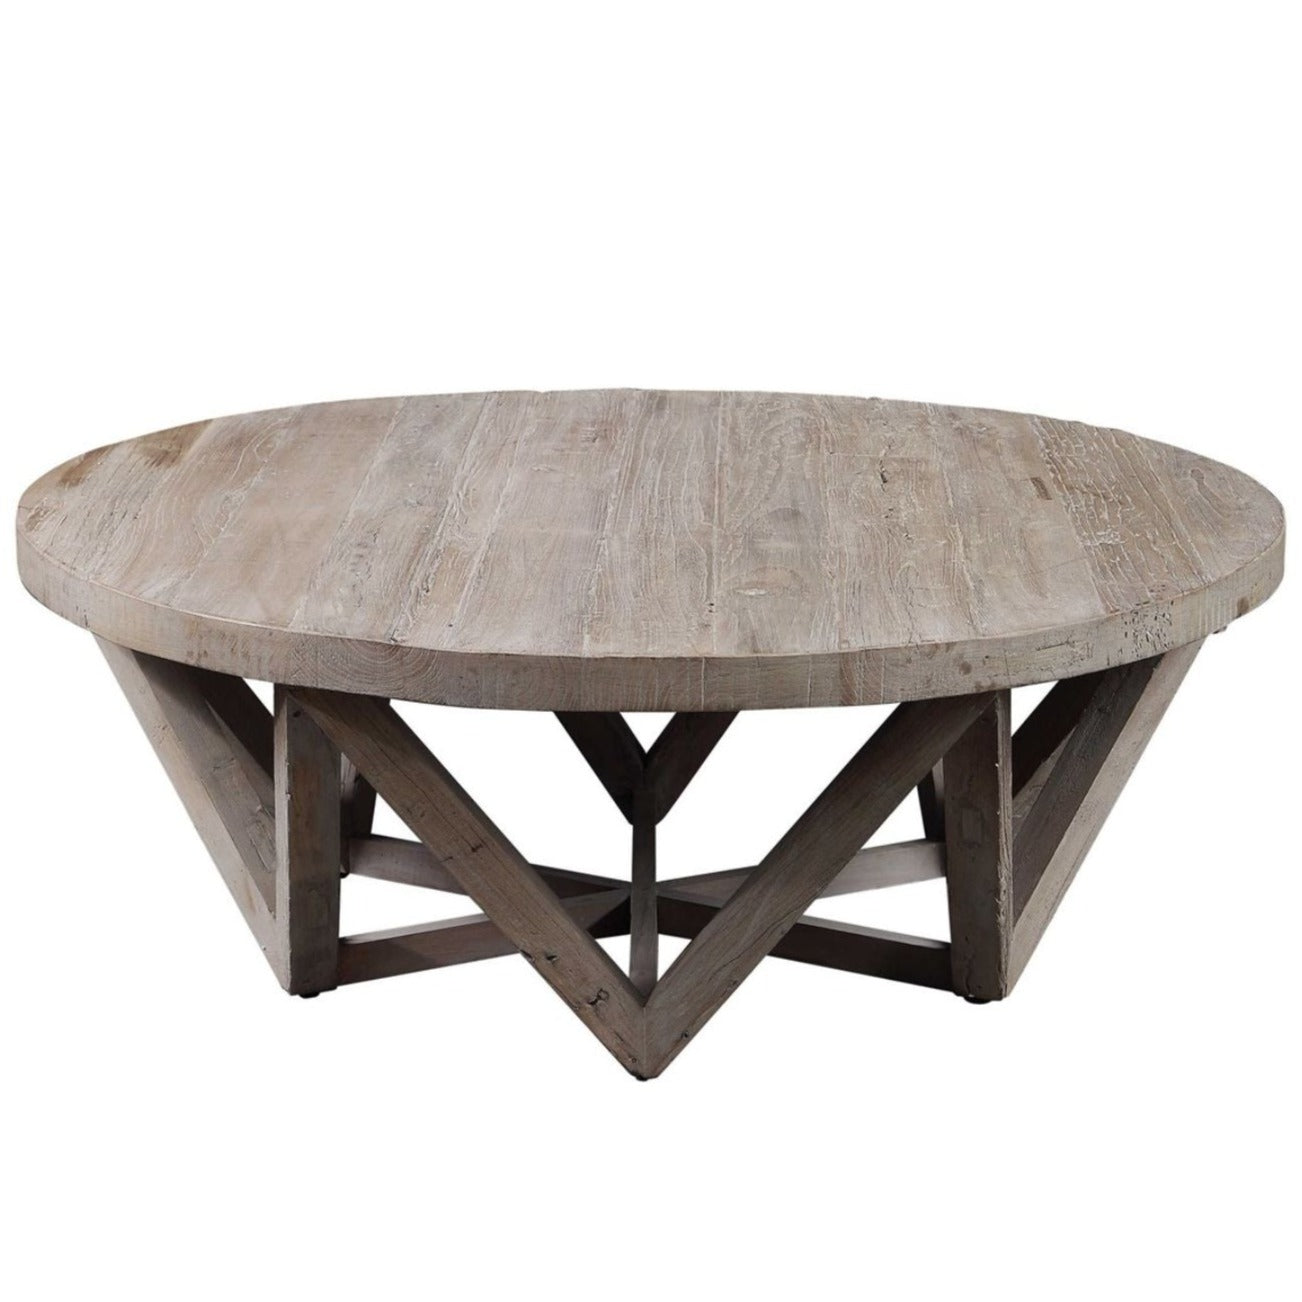 From reclaimed elm wood, this cocktail table features natural wood grain and rustic texture with a geometric, triangle base.